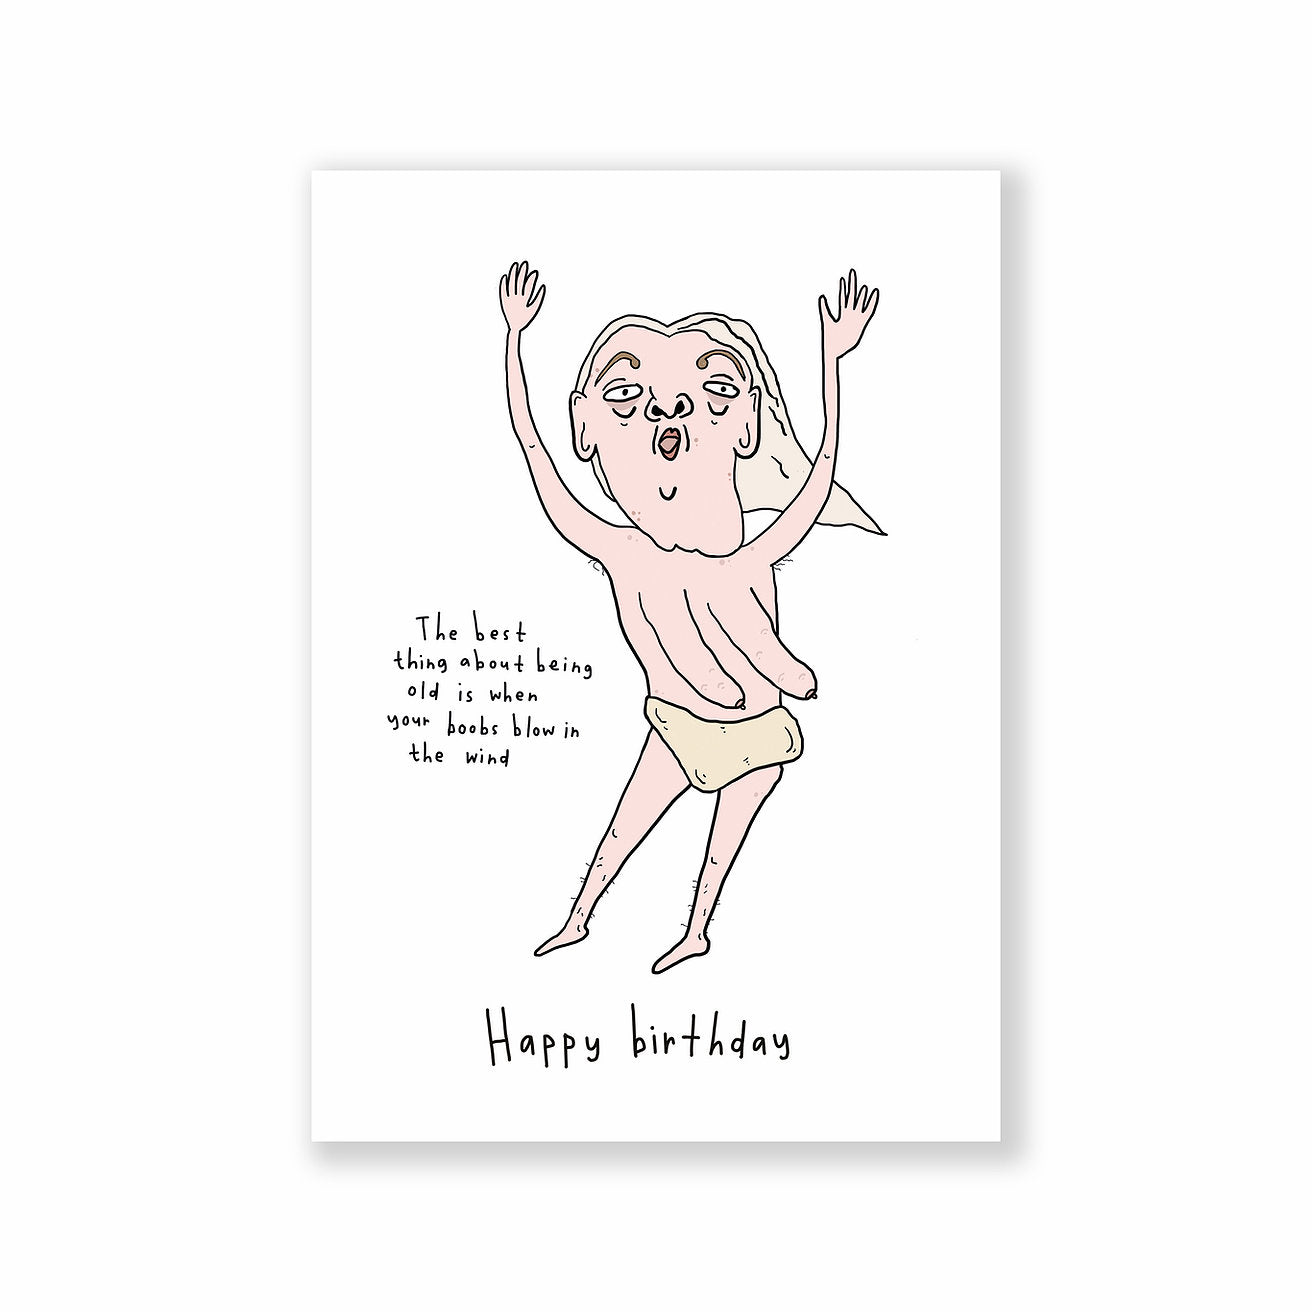 Boobs in the Wind Card